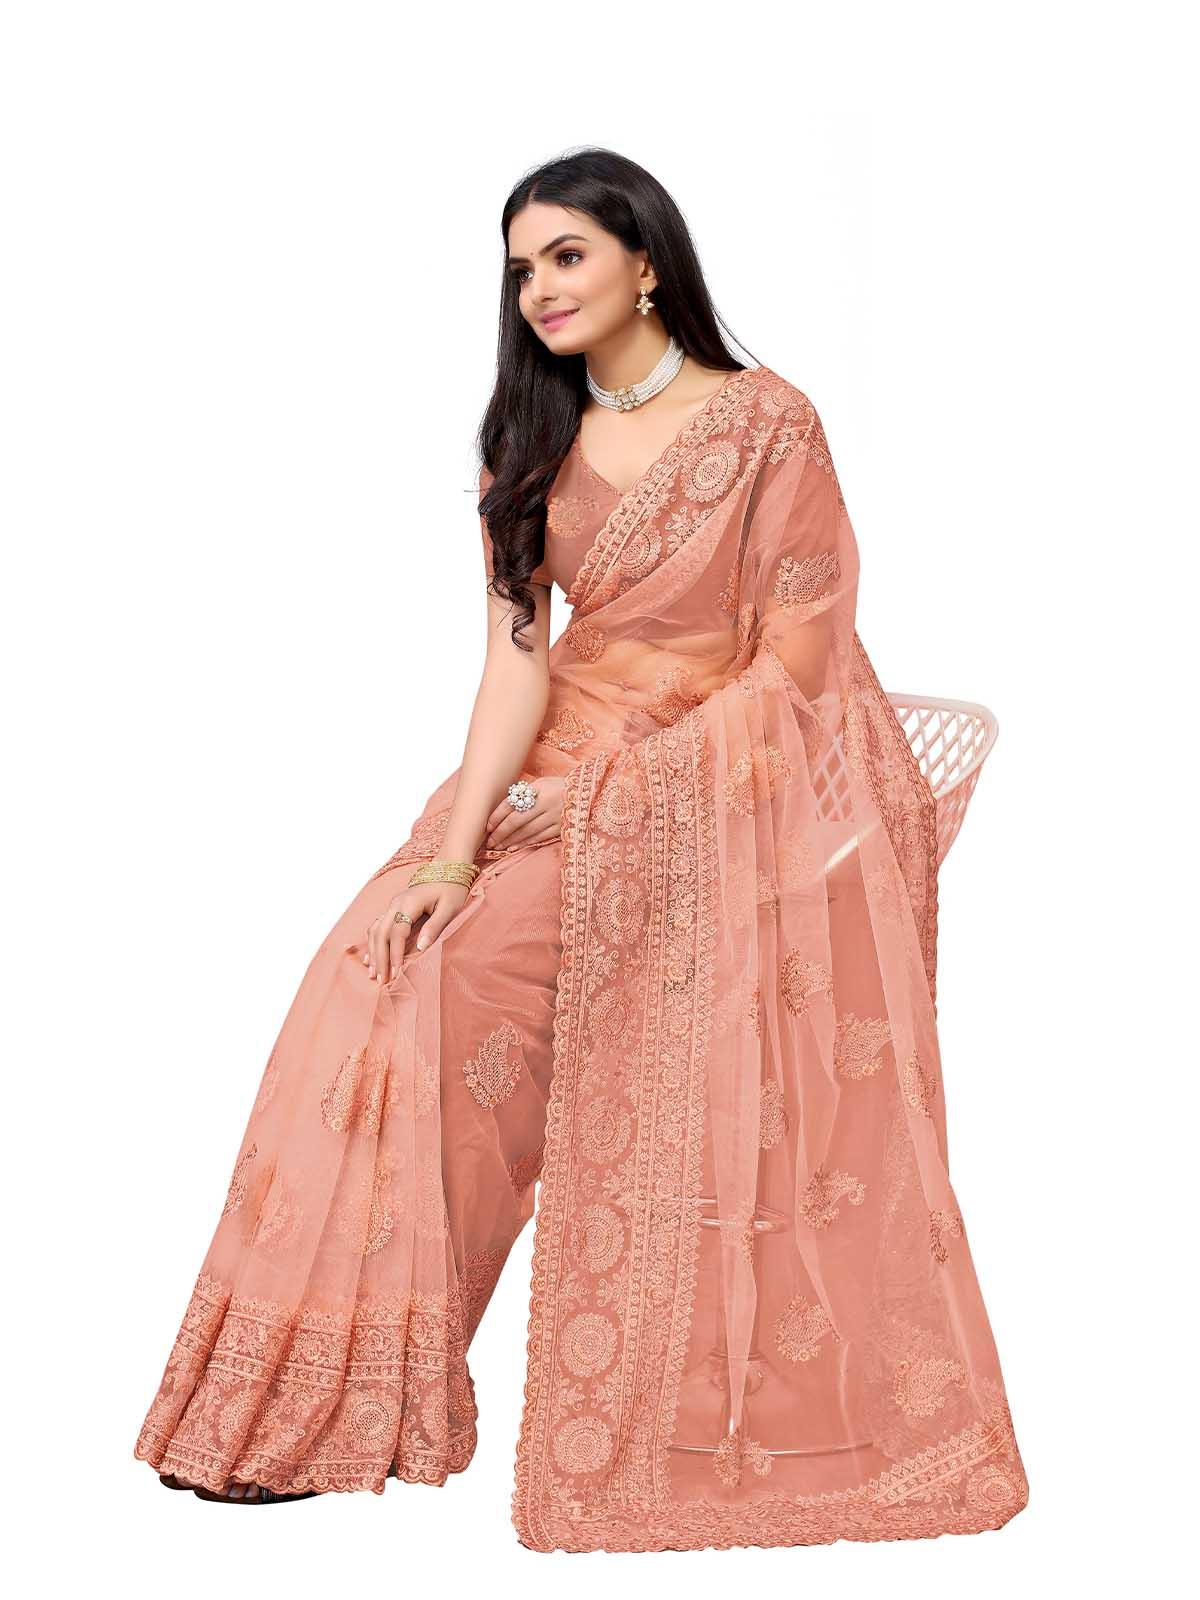 Women's Peach Net Embroidered Saree With Blouse - Odette